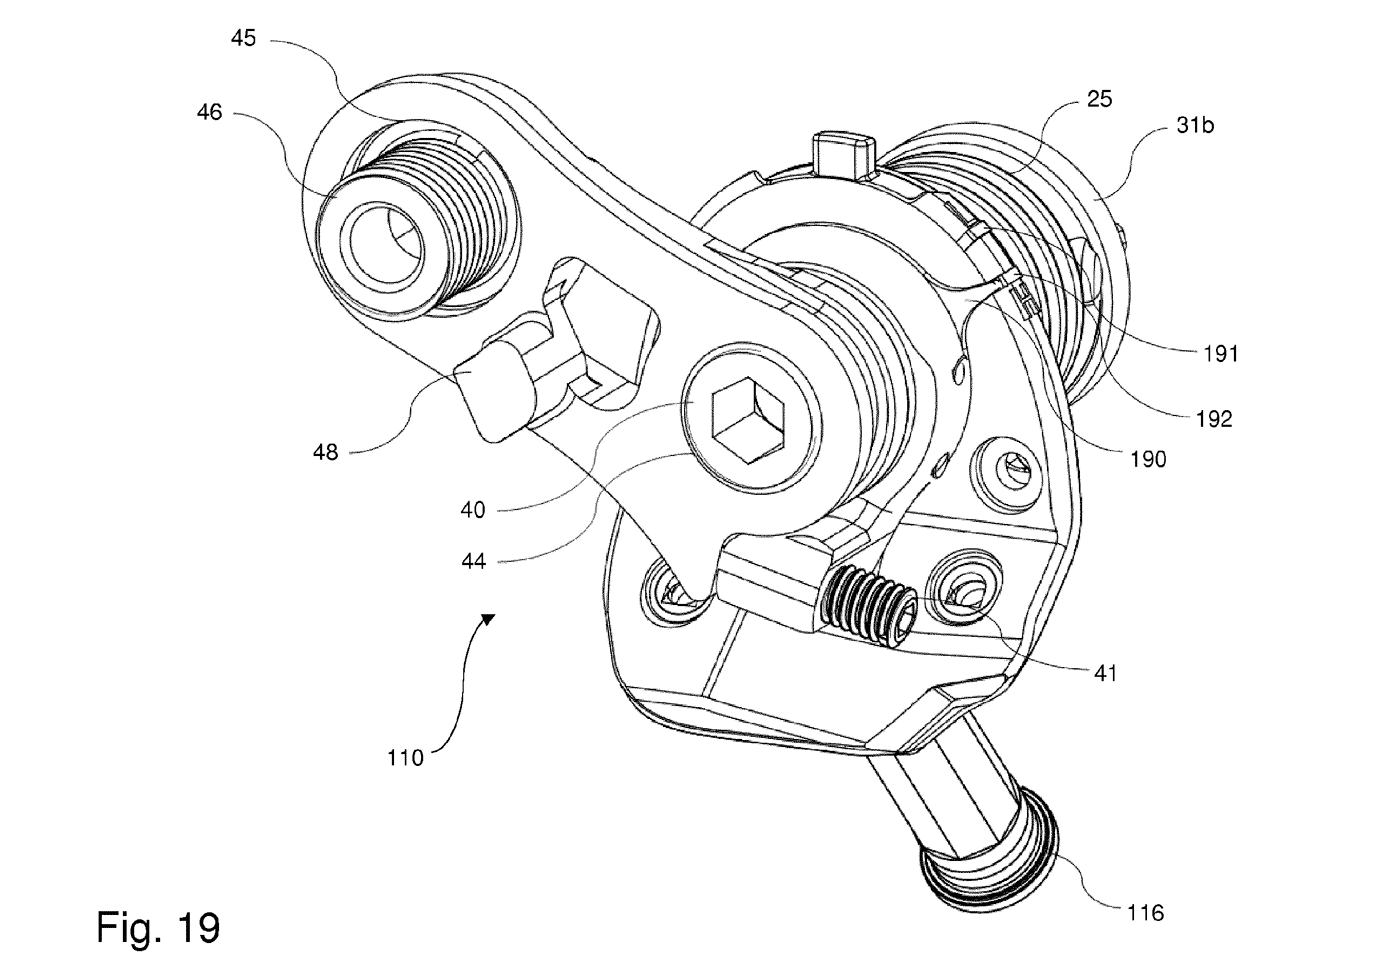 campagnolo wide range derailleur patent drawing shows high and low settings for different cassettes